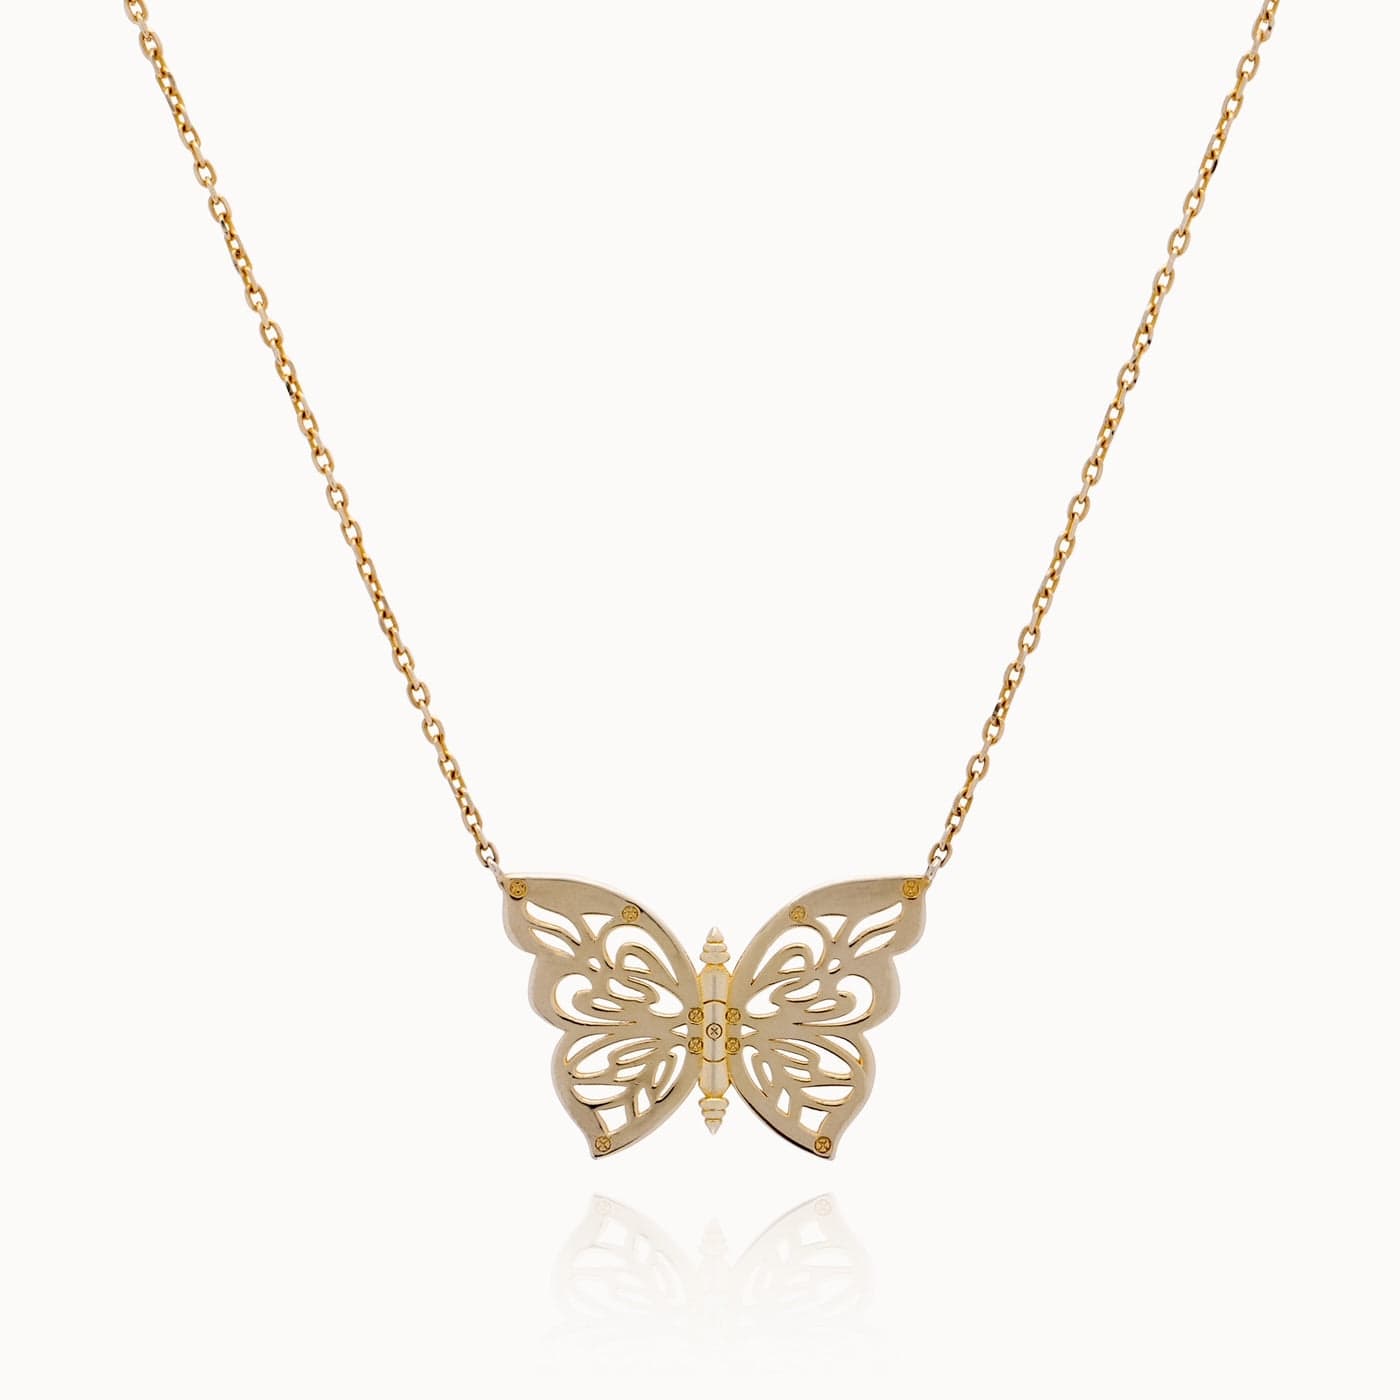 Necklace gold .925 Silver Papillon Butterfly Women's Necklace Jewelry 2022 Silver Papillon Butterfly Women's Necklace Jewelry Olga Nikoza Swimwear